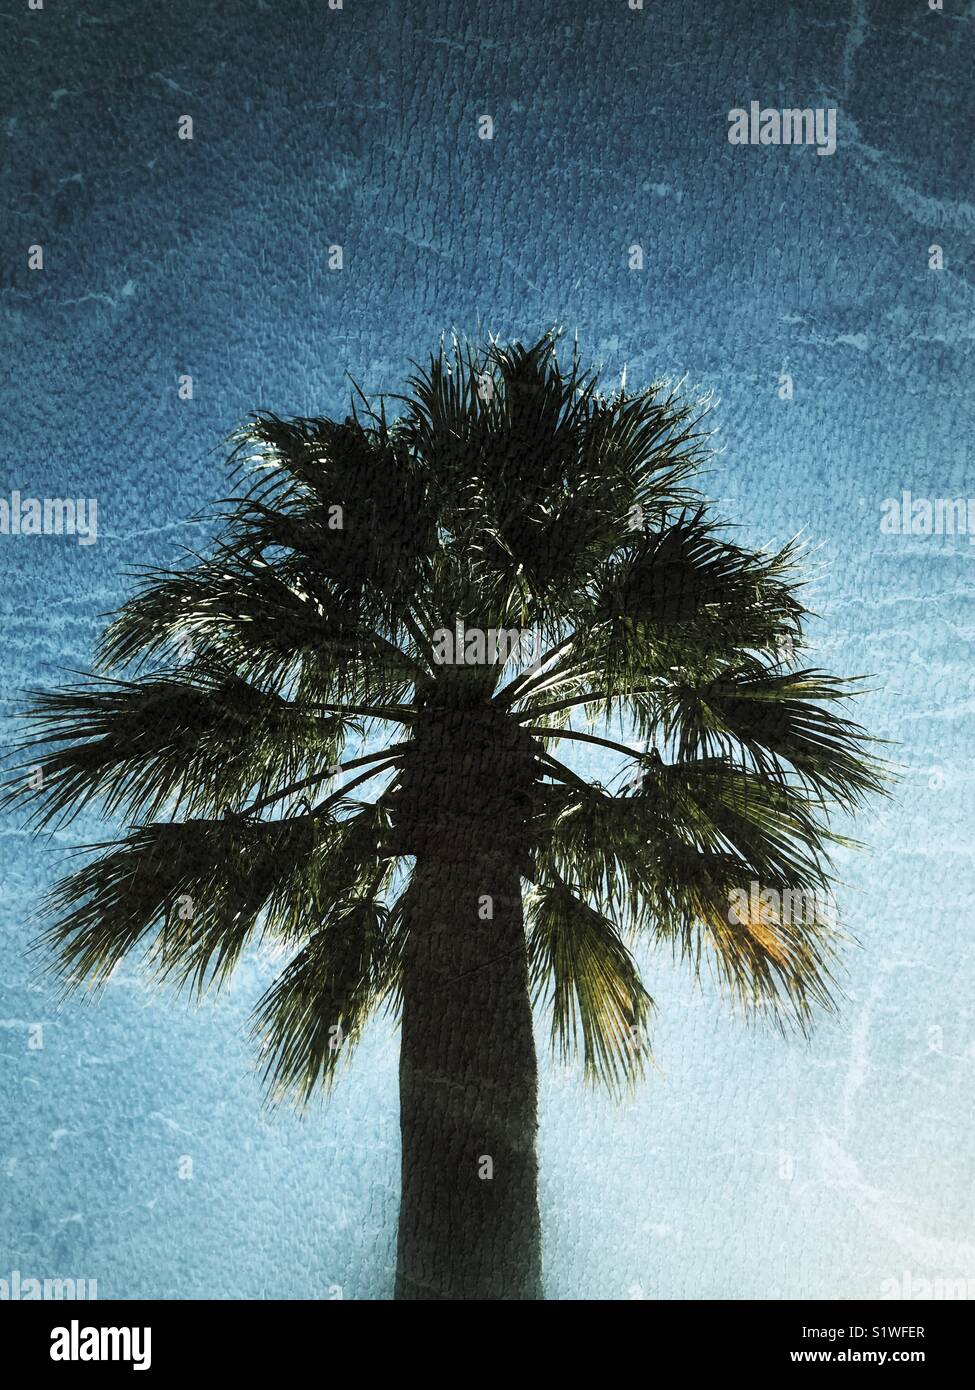 Palm tree with grunge effect Stock Photo